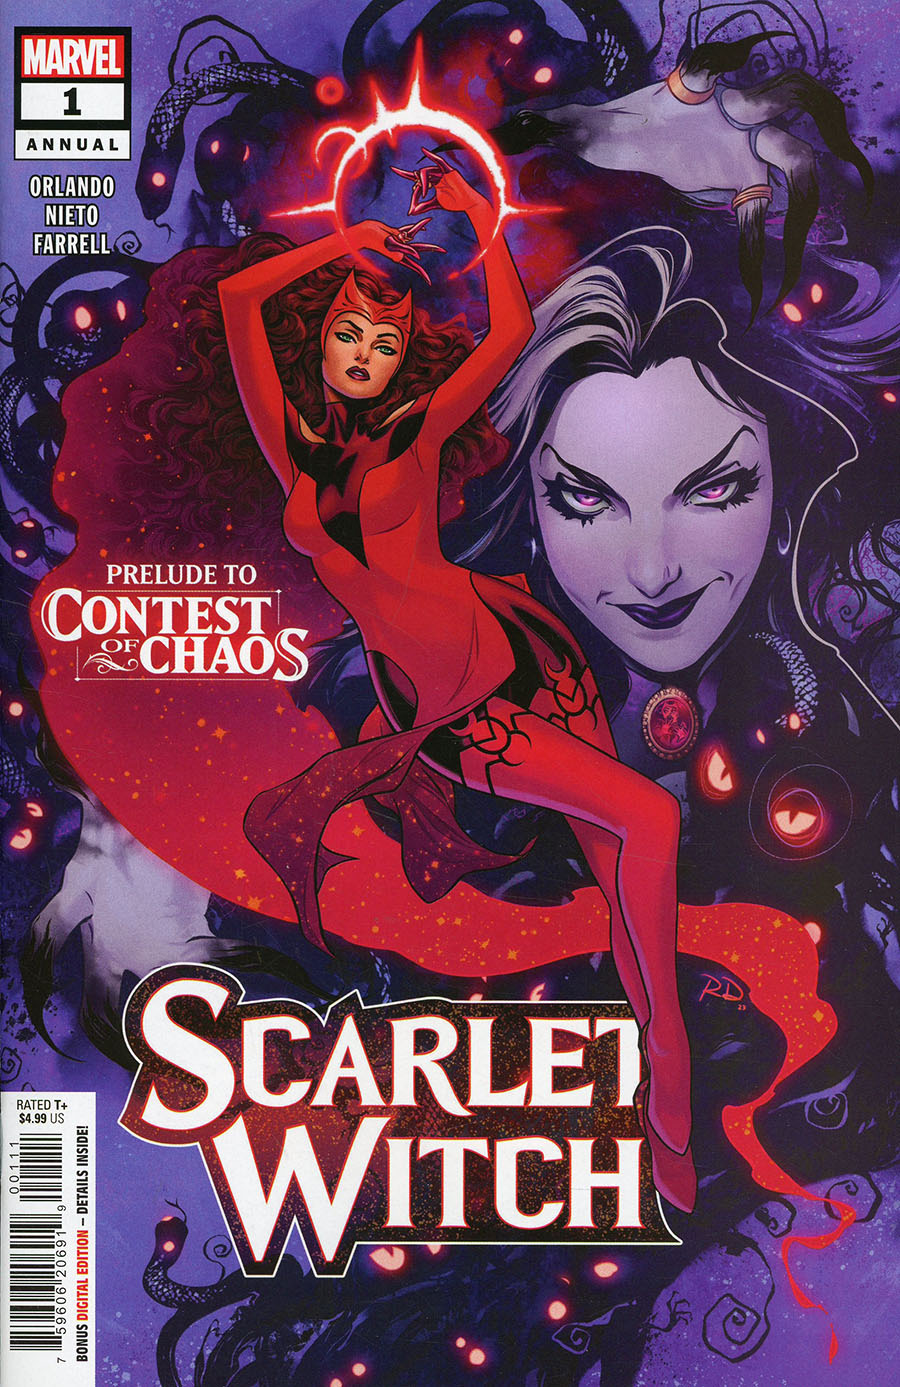 Scarlet Witch Vol 3 Annual #1 Cover A Regular Russell Dauterman Cover (Contest Of Chaos Tie-In)